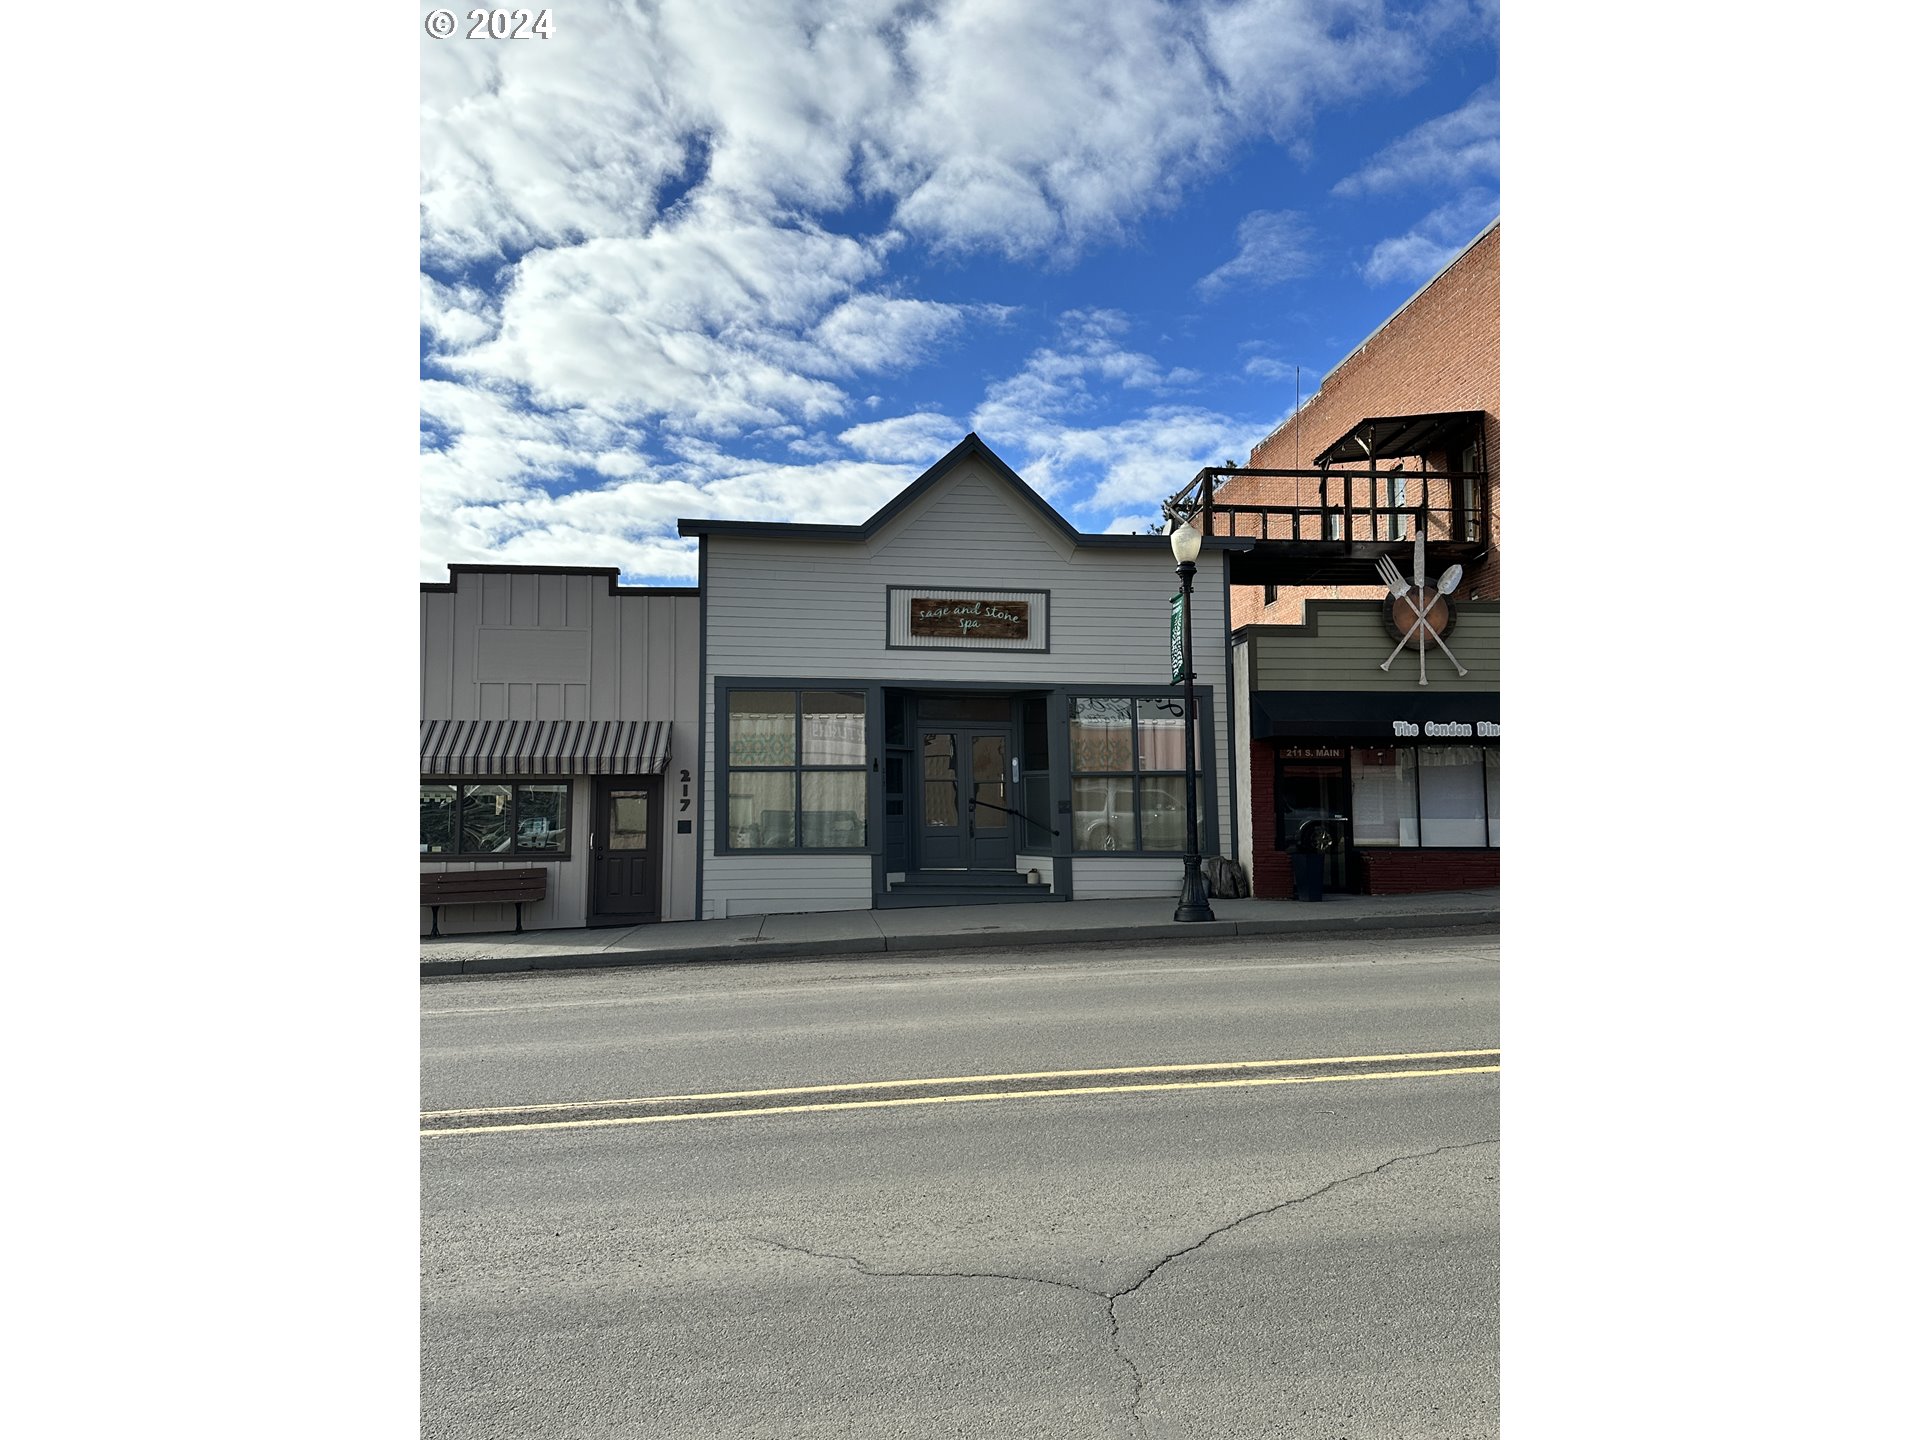 215 S MAIN ST, Condon, OR 97823